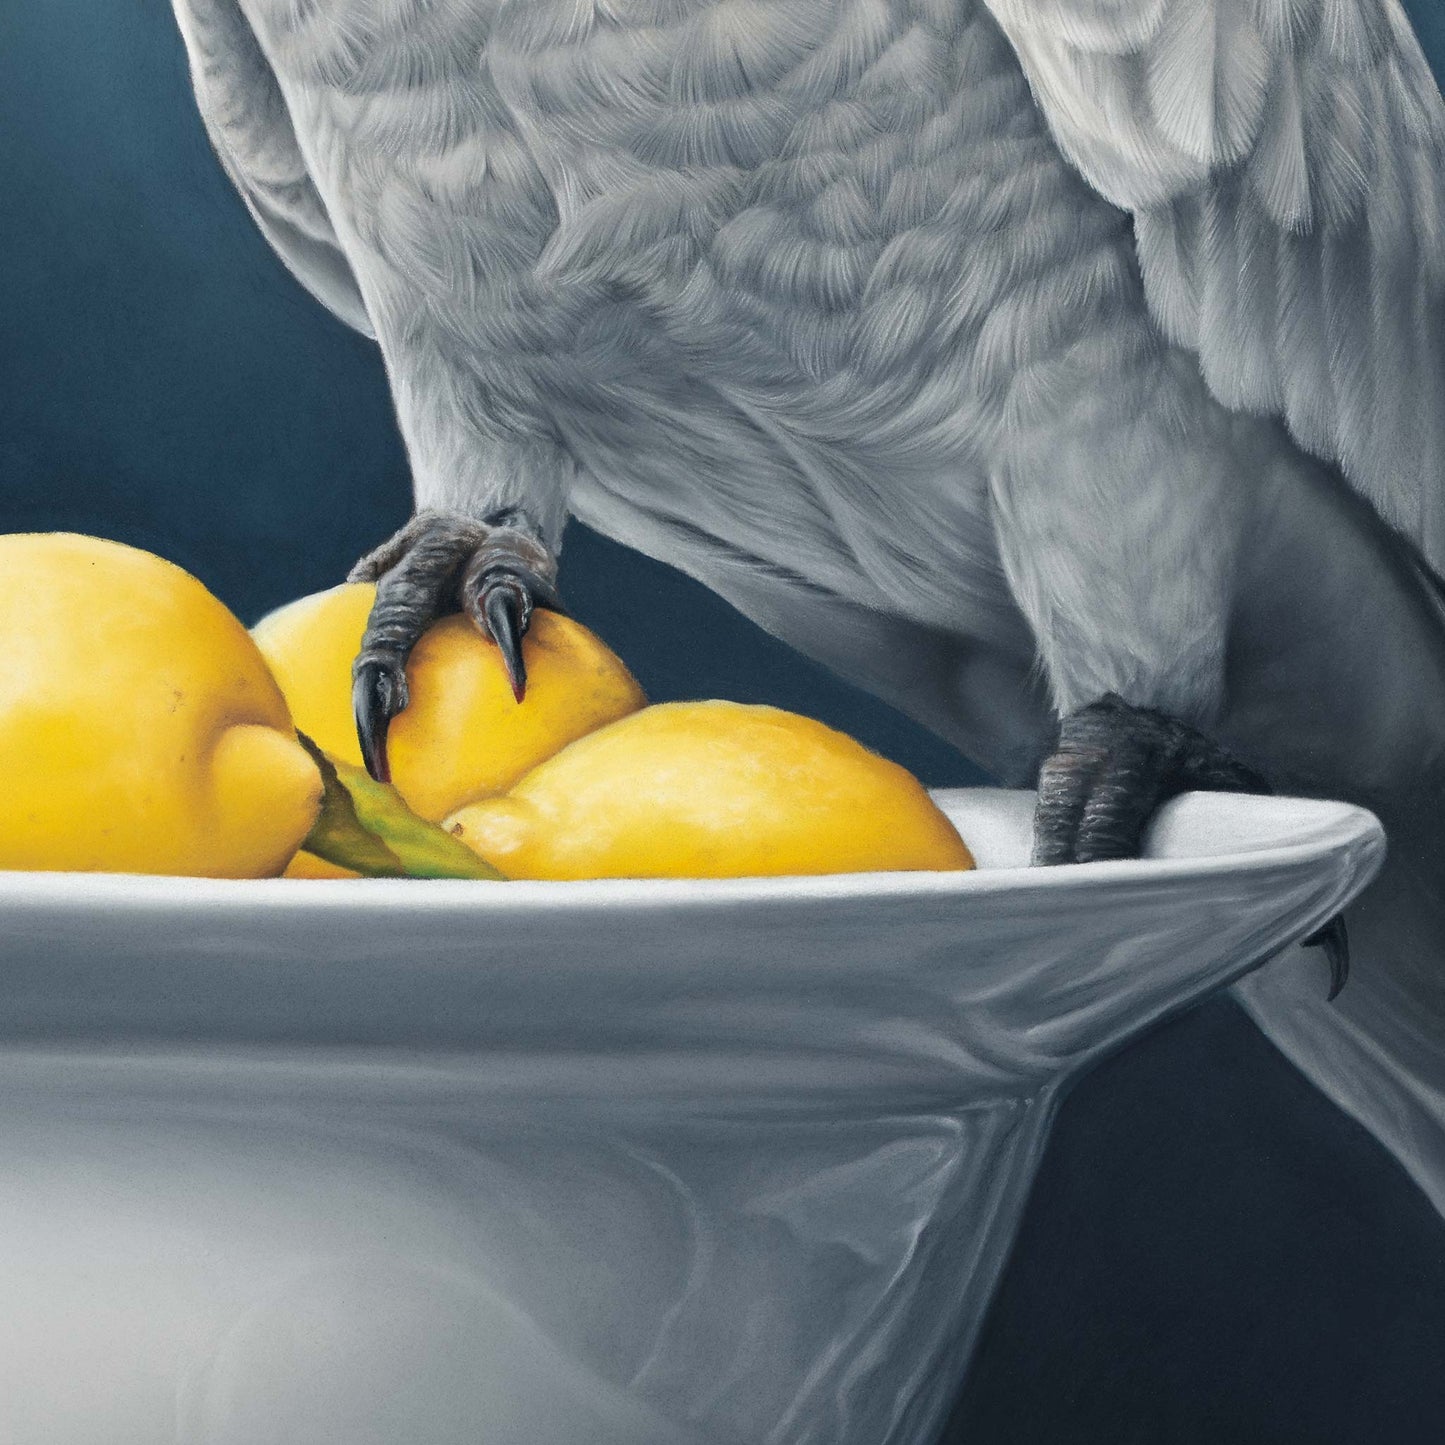 close up realism drawing of a white cockatoo sitting on a bowl of lemons